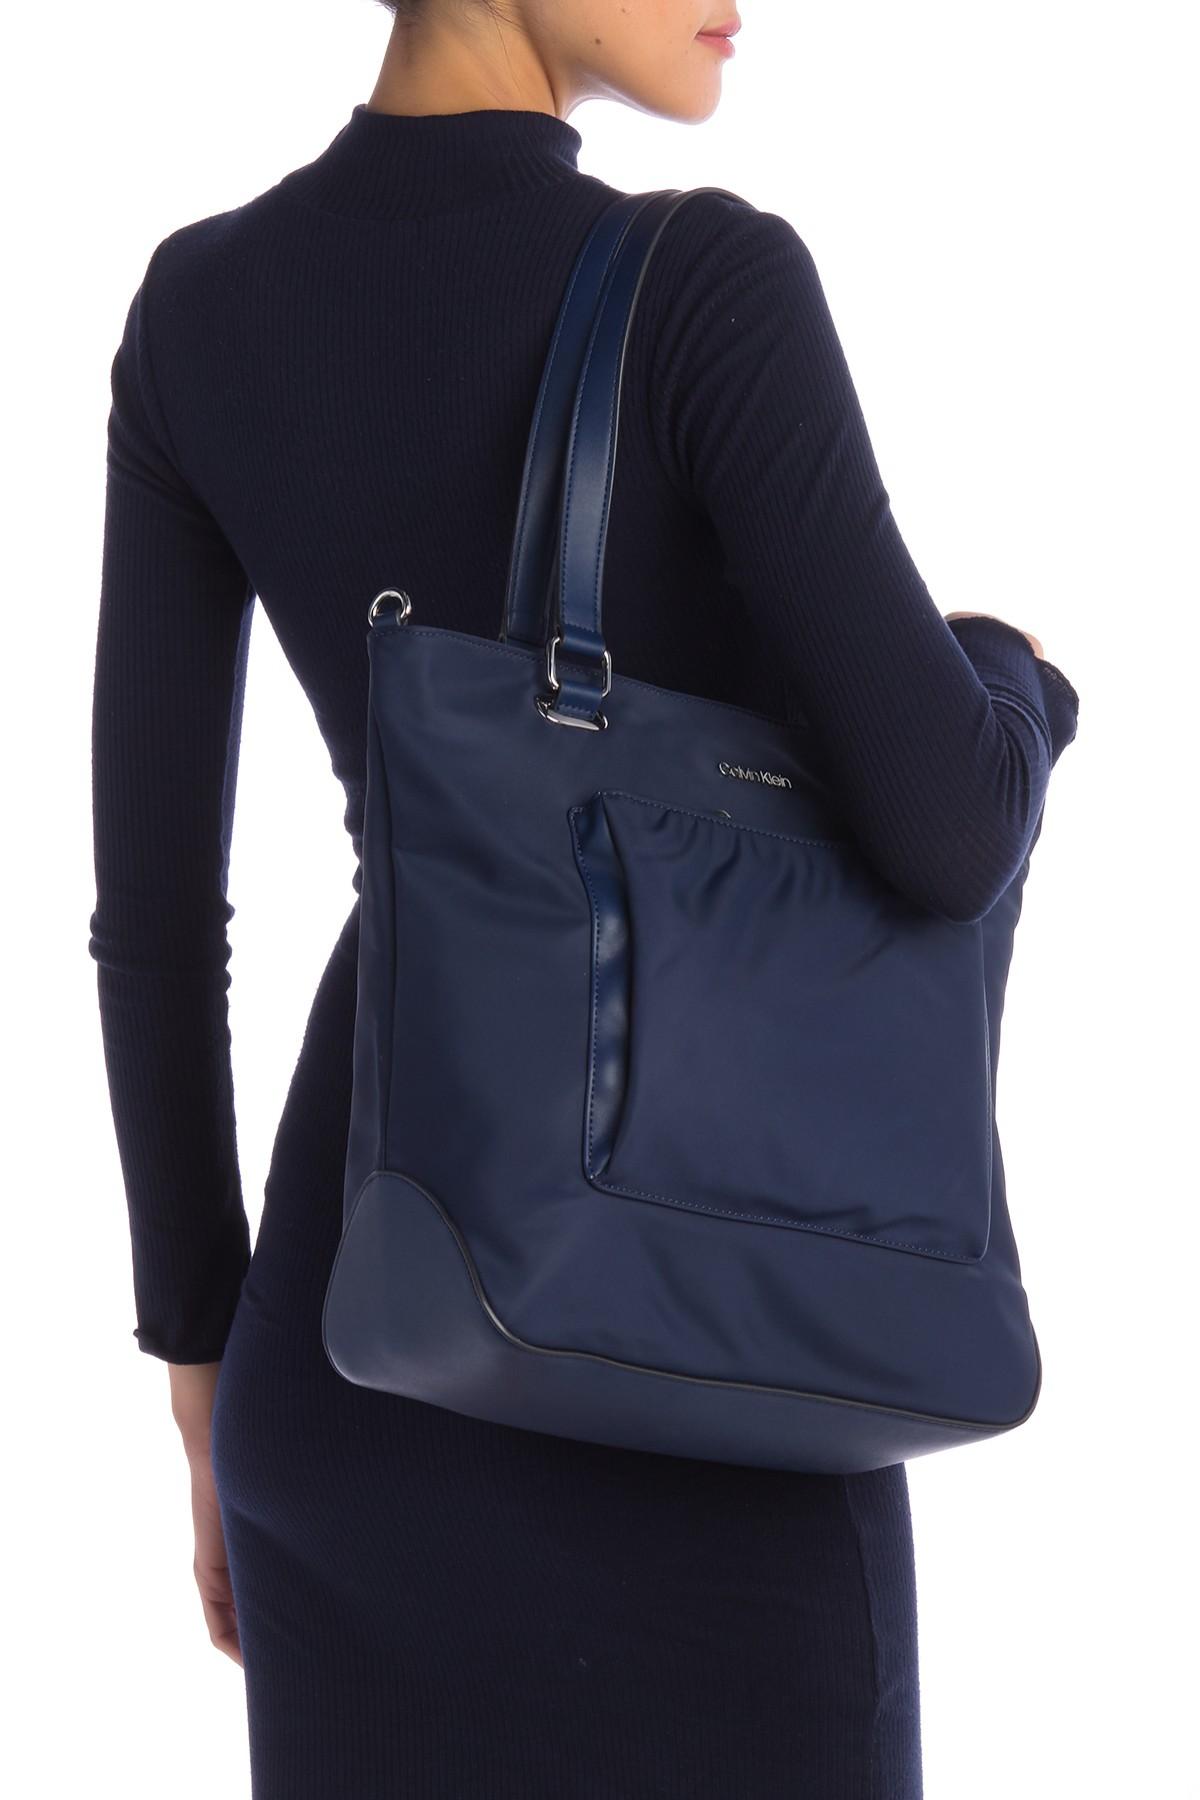 Calvin Klein Synthetic Abby Nylon Tote in Navy (Blue) - Lyst